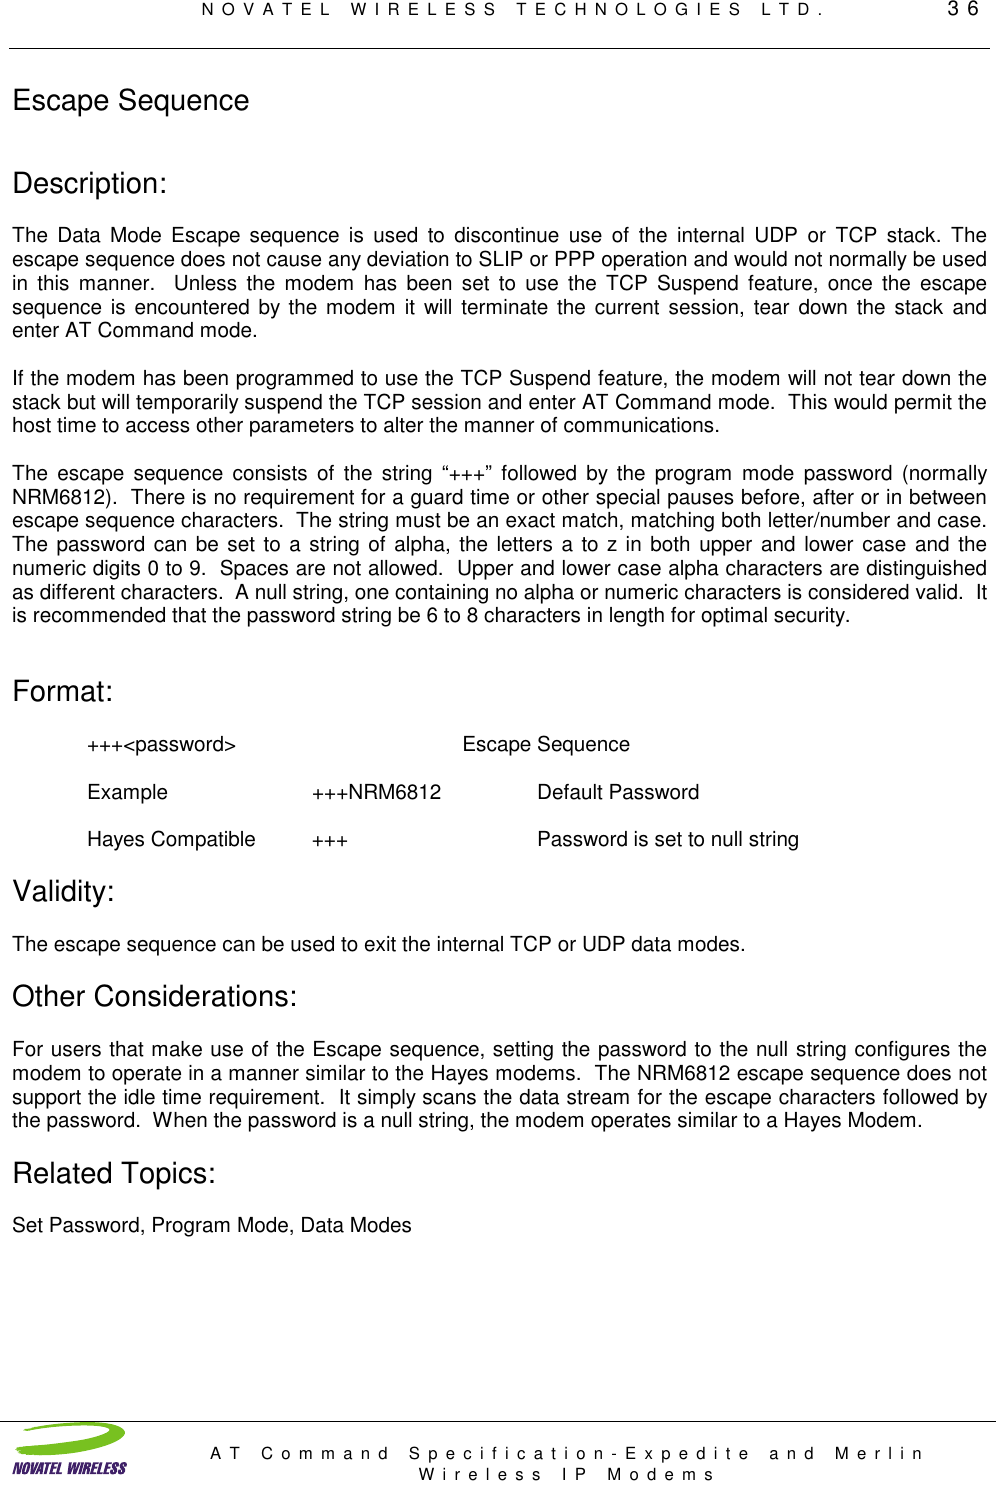 NOVATEL WIRELESS TECHNOLOGIES LTD.         36AT Command Specification-Expedite and MerlinWireless IP ModemsEscape SequenceDescription:The Data Mode Escape sequence is used to discontinue use of the internal UDP or TCP stack. Theescape sequence does not cause any deviation to SLIP or PPP operation and would not normally be usedin this manner.  Unless the modem has been set to use the TCP Suspend feature, once the escapesequence is encountered by the modem it will terminate the current session, tear down the stack andenter AT Command mode.If the modem has been programmed to use the TCP Suspend feature, the modem will not tear down thestack but will temporarily suspend the TCP session and enter AT Command mode.  This would permit thehost time to access other parameters to alter the manner of communications.The escape sequence consists of the string “+++” followed by the program mode password (normallyNRM6812).  There is no requirement for a guard time or other special pauses before, after or in betweenescape sequence characters.  The string must be an exact match, matching both letter/number and case.The password can be set to a string of alpha, the letters a to z in both upper and lower case and thenumeric digits 0 to 9.  Spaces are not allowed.  Upper and lower case alpha characters are distinguishedas different characters.  A null string, one containing no alpha or numeric characters is considered valid.  Itis recommended that the password string be 6 to 8 characters in length for optimal security.Format:+++&lt;password&gt; Escape SequenceExample +++NRM6812 Default PasswordHayes Compatible +++ Password is set to null stringValidity:The escape sequence can be used to exit the internal TCP or UDP data modes.Other Considerations:For users that make use of the Escape sequence, setting the password to the null string configures themodem to operate in a manner similar to the Hayes modems.  The NRM6812 escape sequence does notsupport the idle time requirement.  It simply scans the data stream for the escape characters followed bythe password.  When the password is a null string, the modem operates similar to a Hayes Modem.Related Topics:Set Password, Program Mode, Data Modes